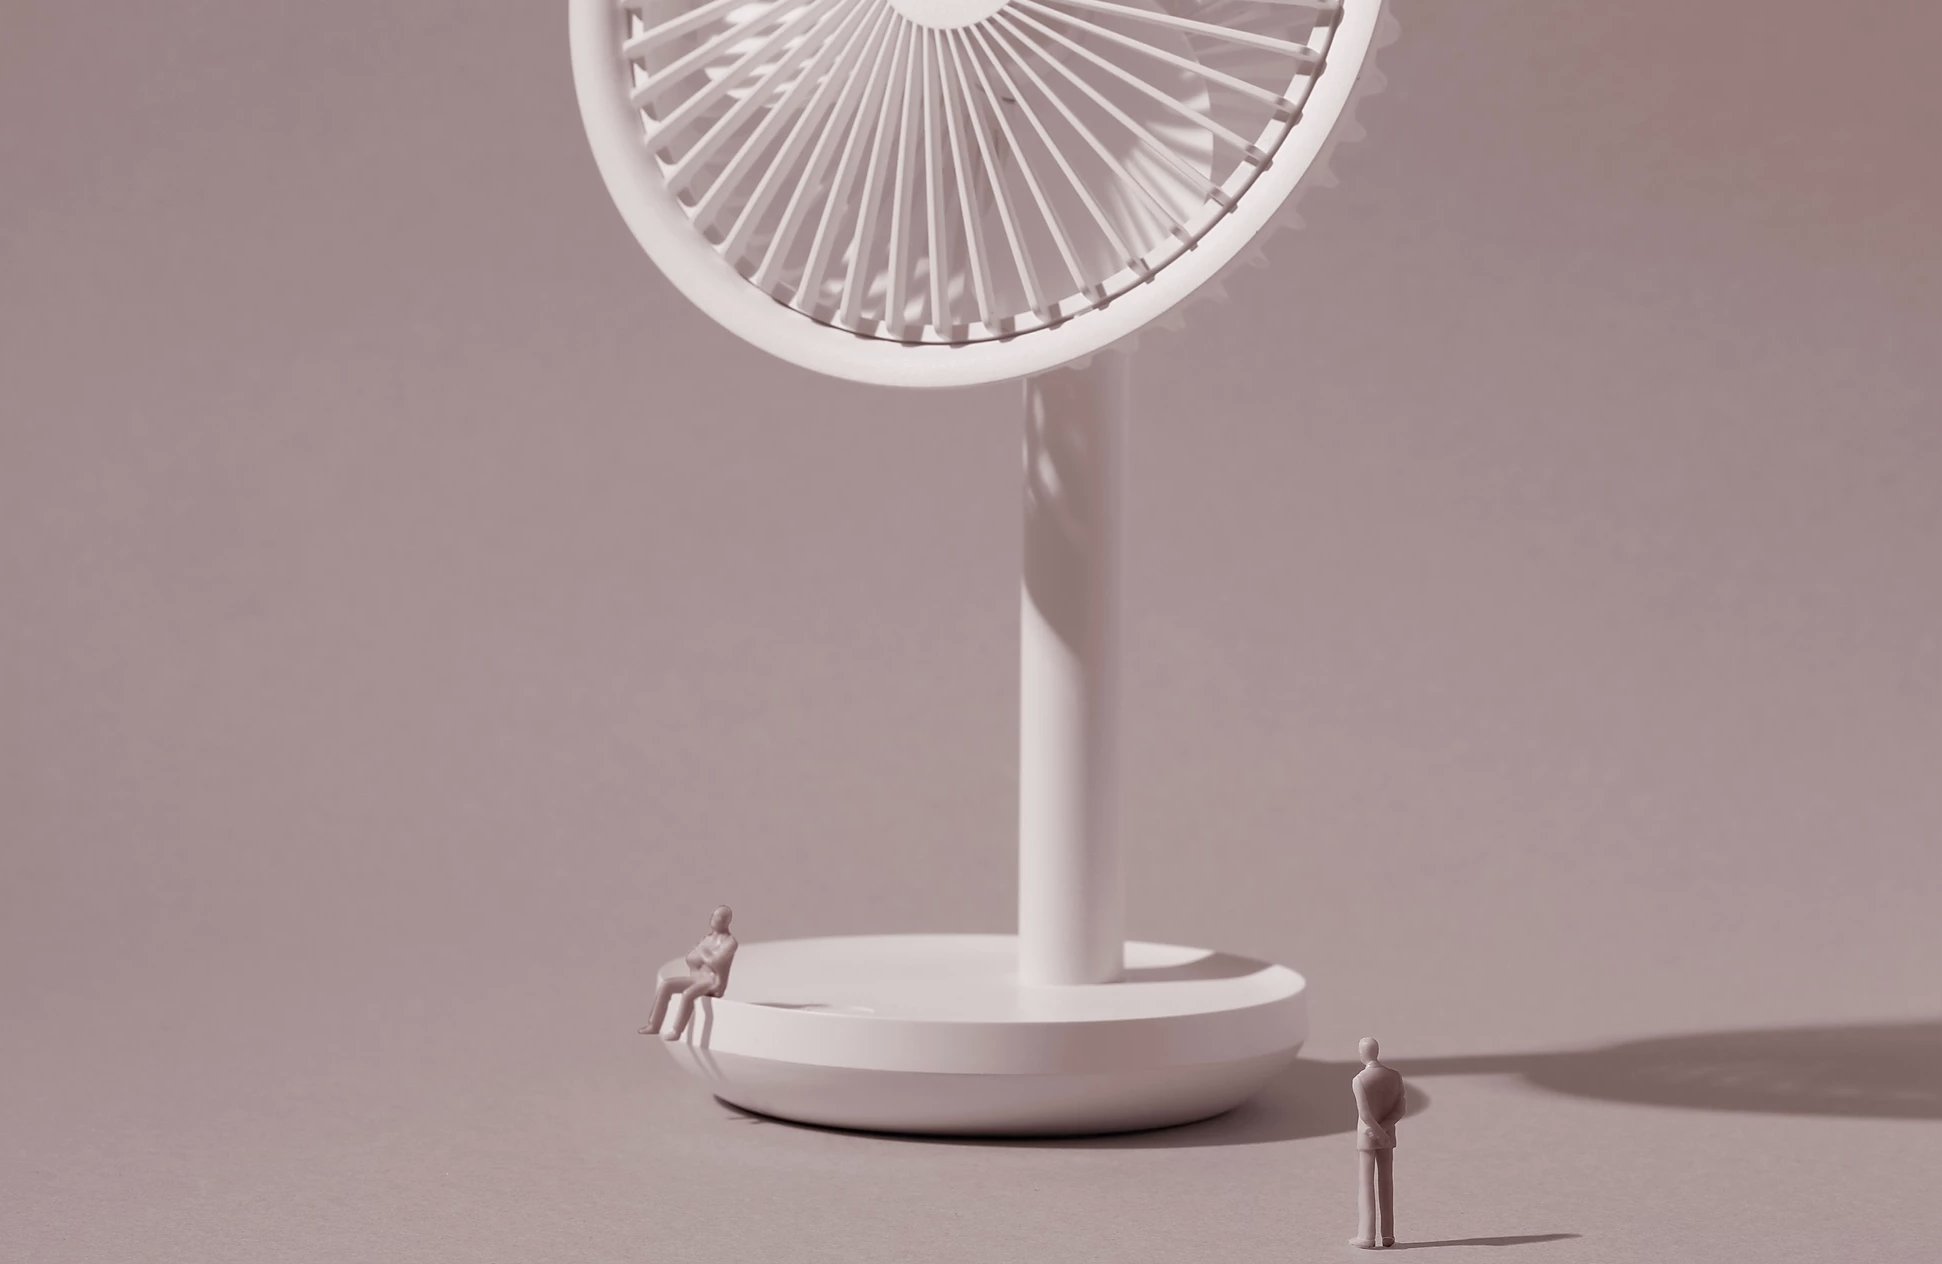  Stand fan -  Second White  